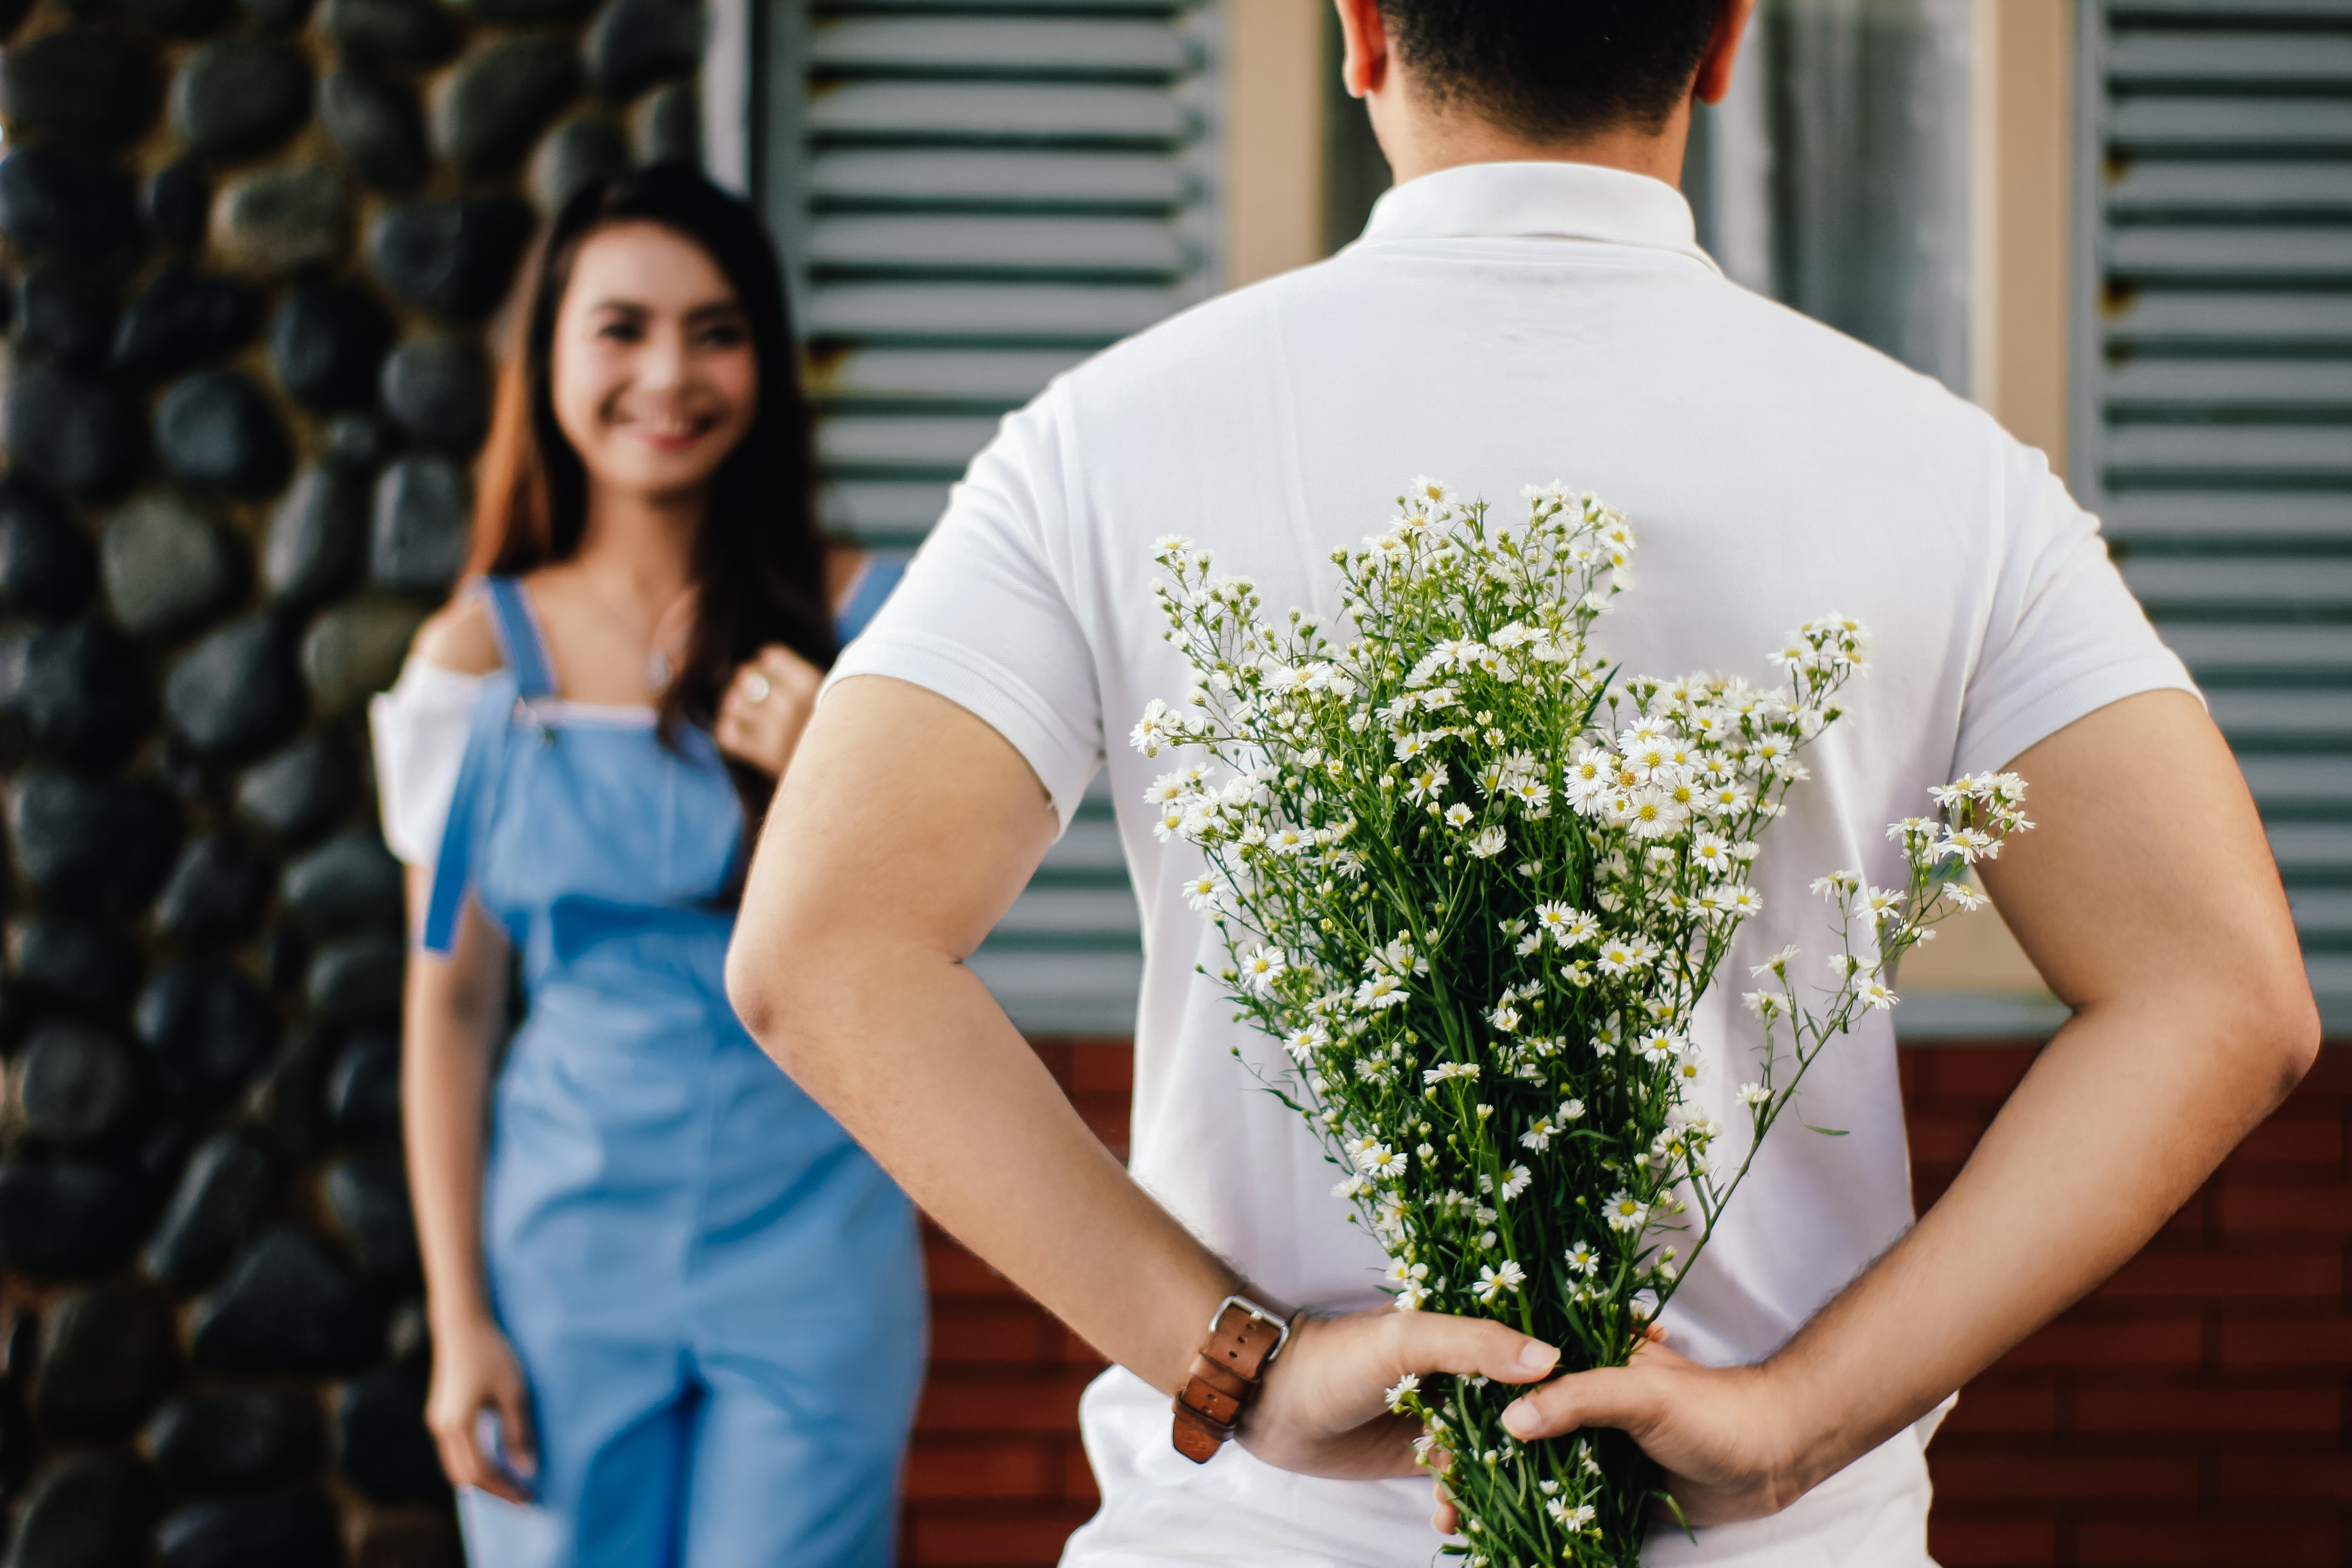 A man surprising his partner with flowers. | Source: Pexels